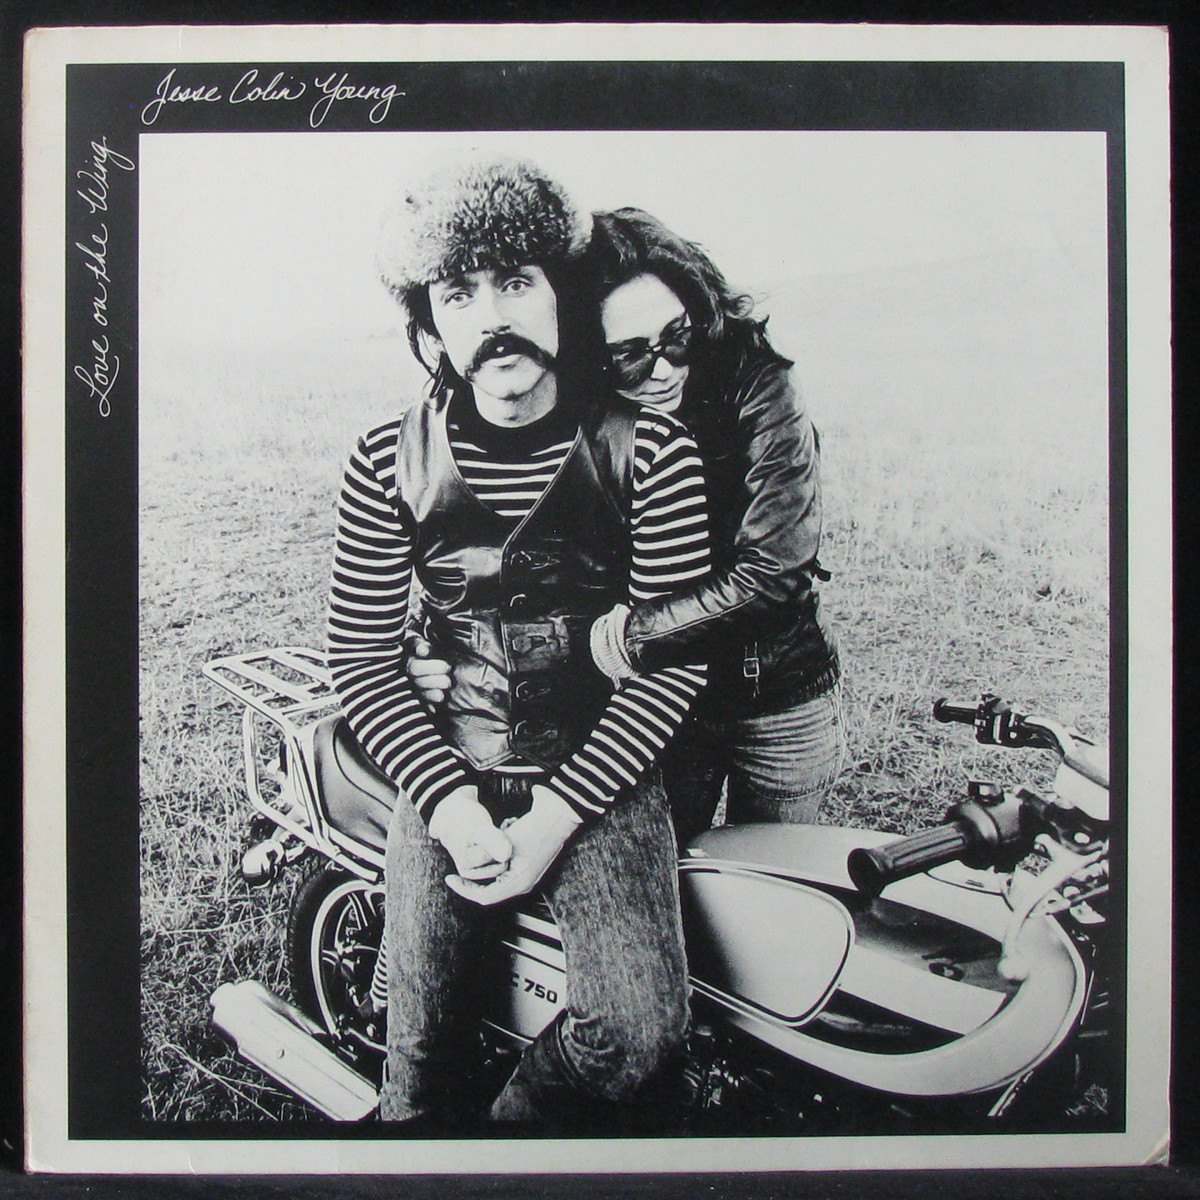 LP Jesse Colin Young — Love On The Wing фото